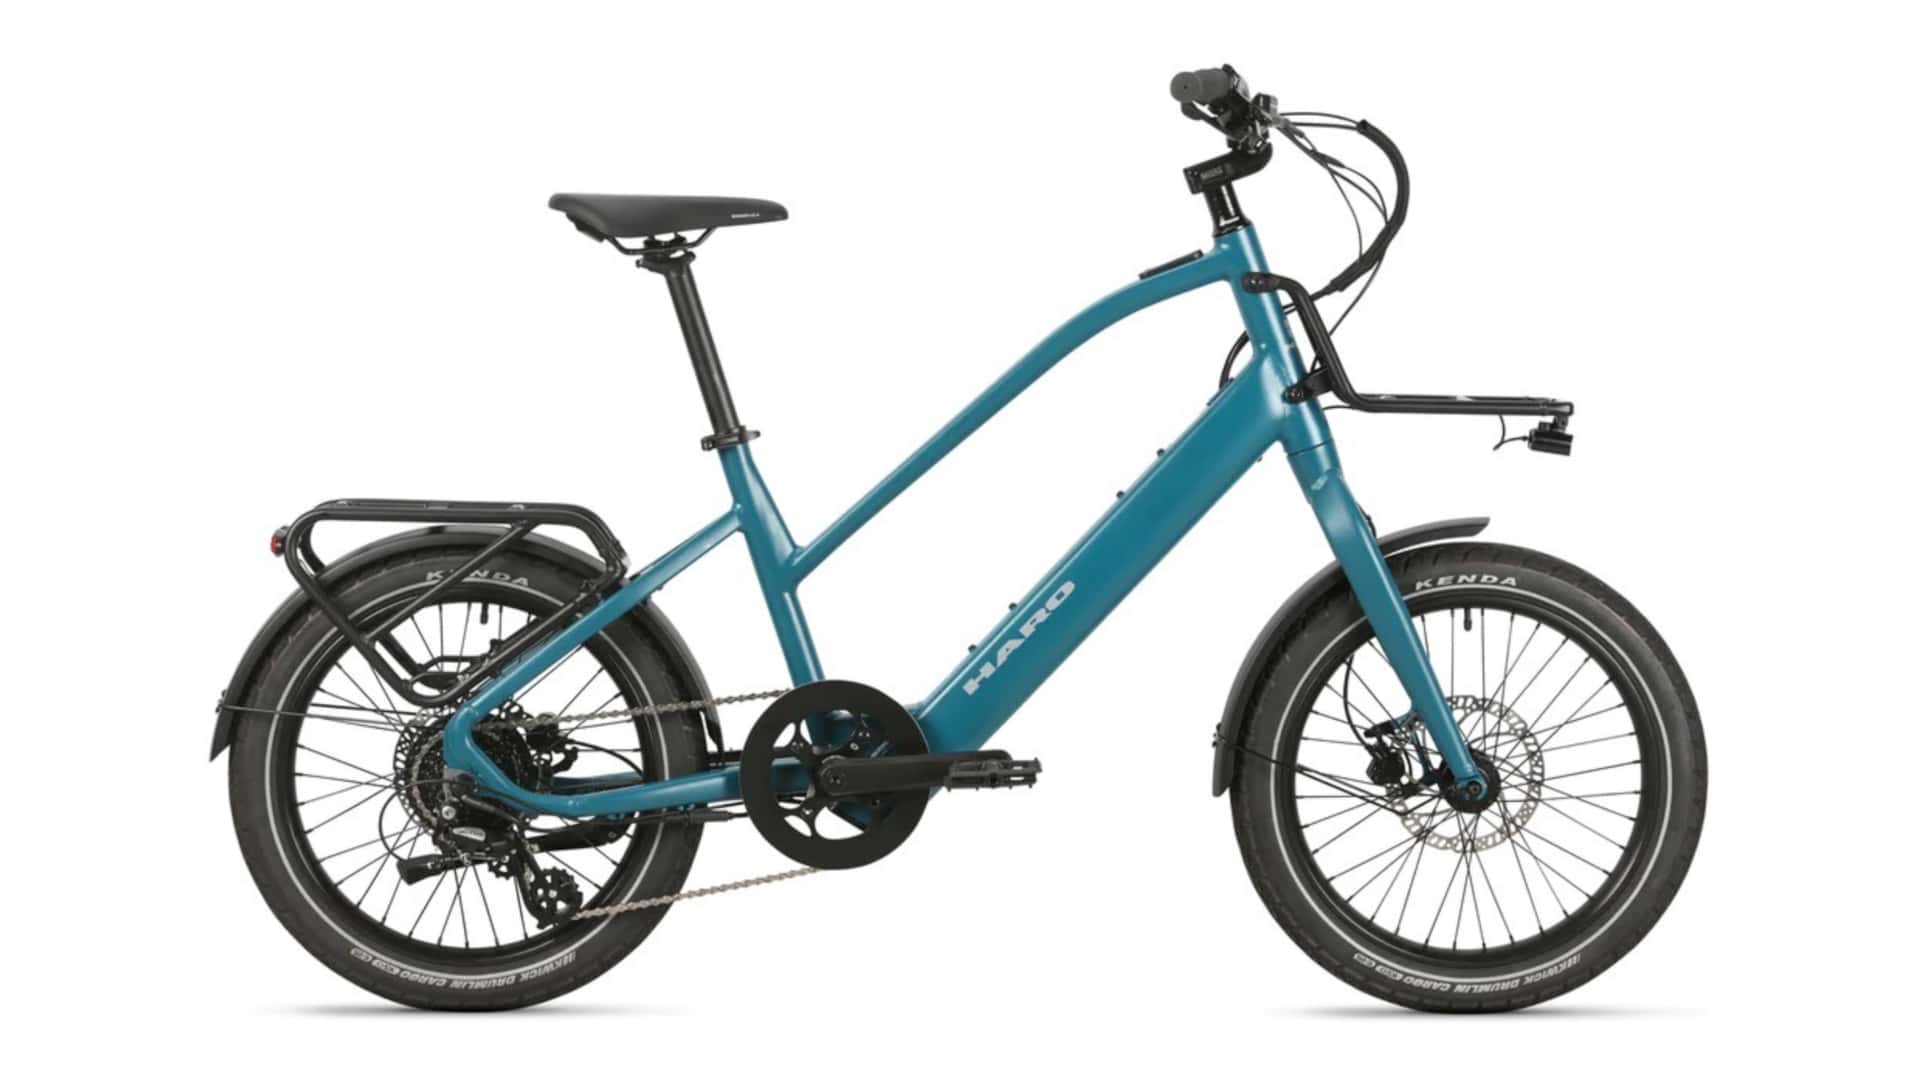 haro unveils the new skwad lt, a compact and versatile urban e-bike